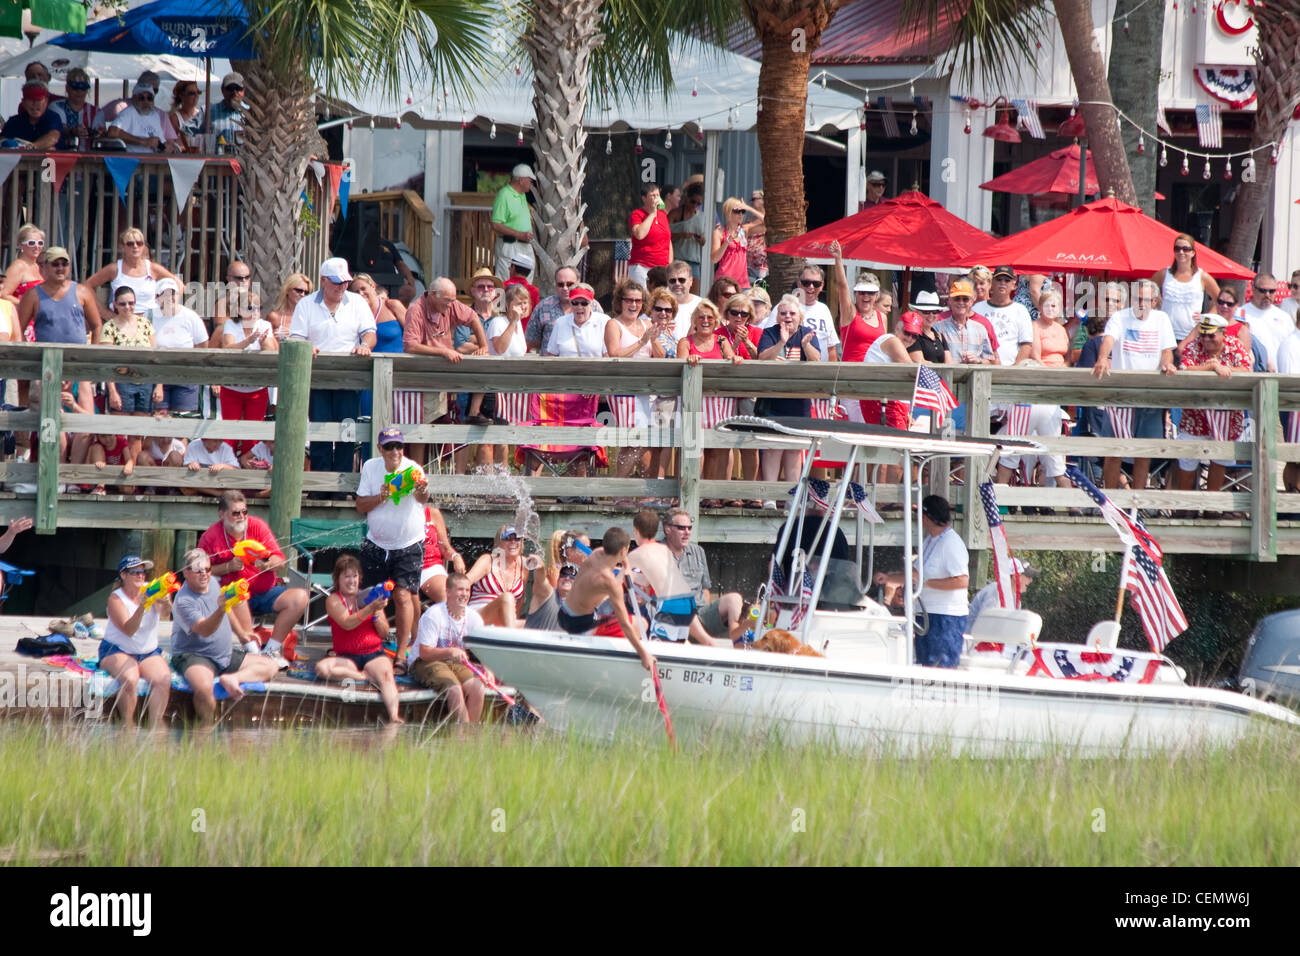 4th of July Boat Parade in Myrtle beach South Carolina USA Stock Photo